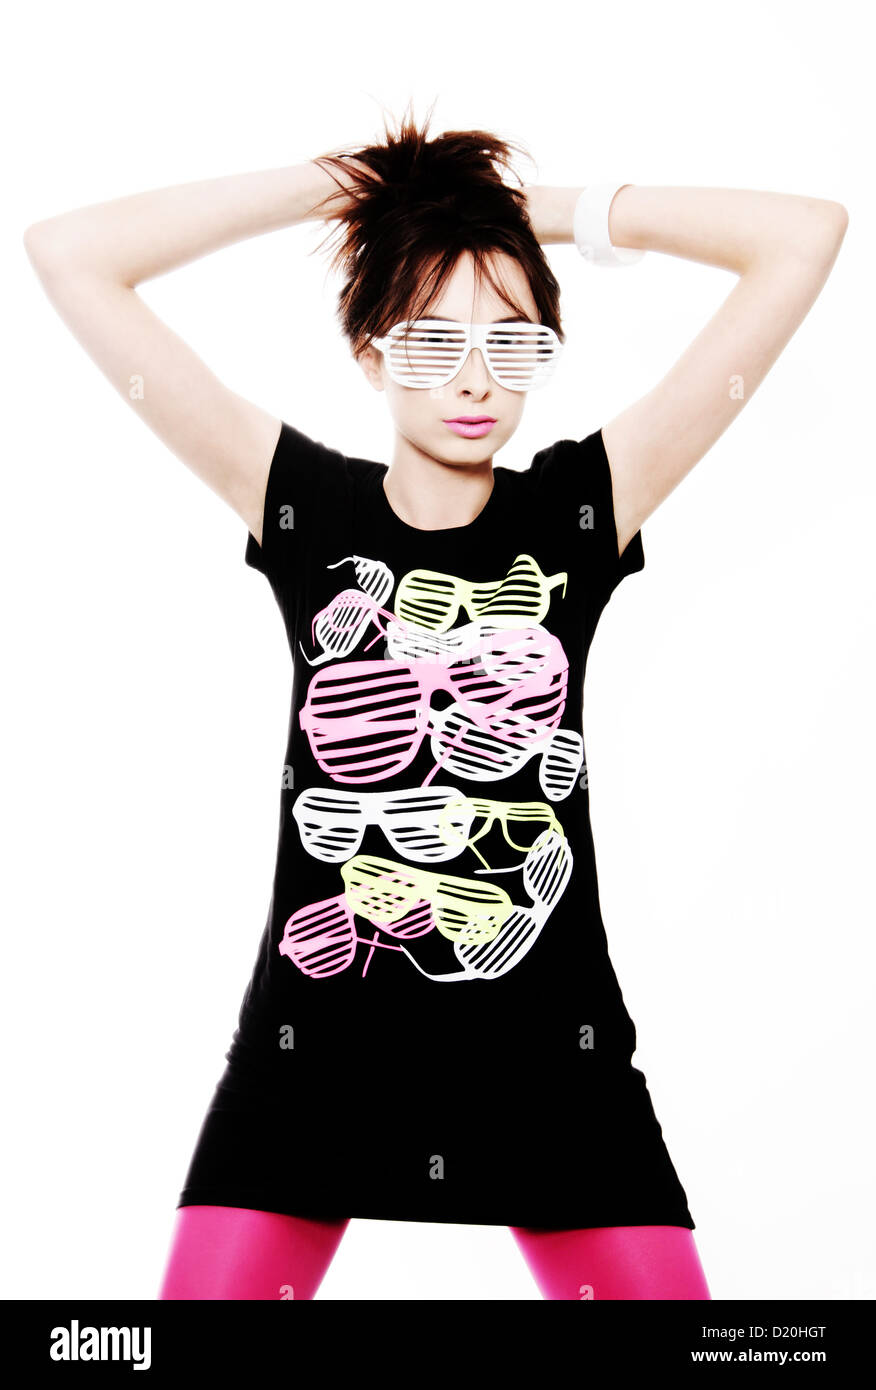 Woman, 24, posing with a cool pair of glasses and a fitting t-shirt with the same motive Stock Photo